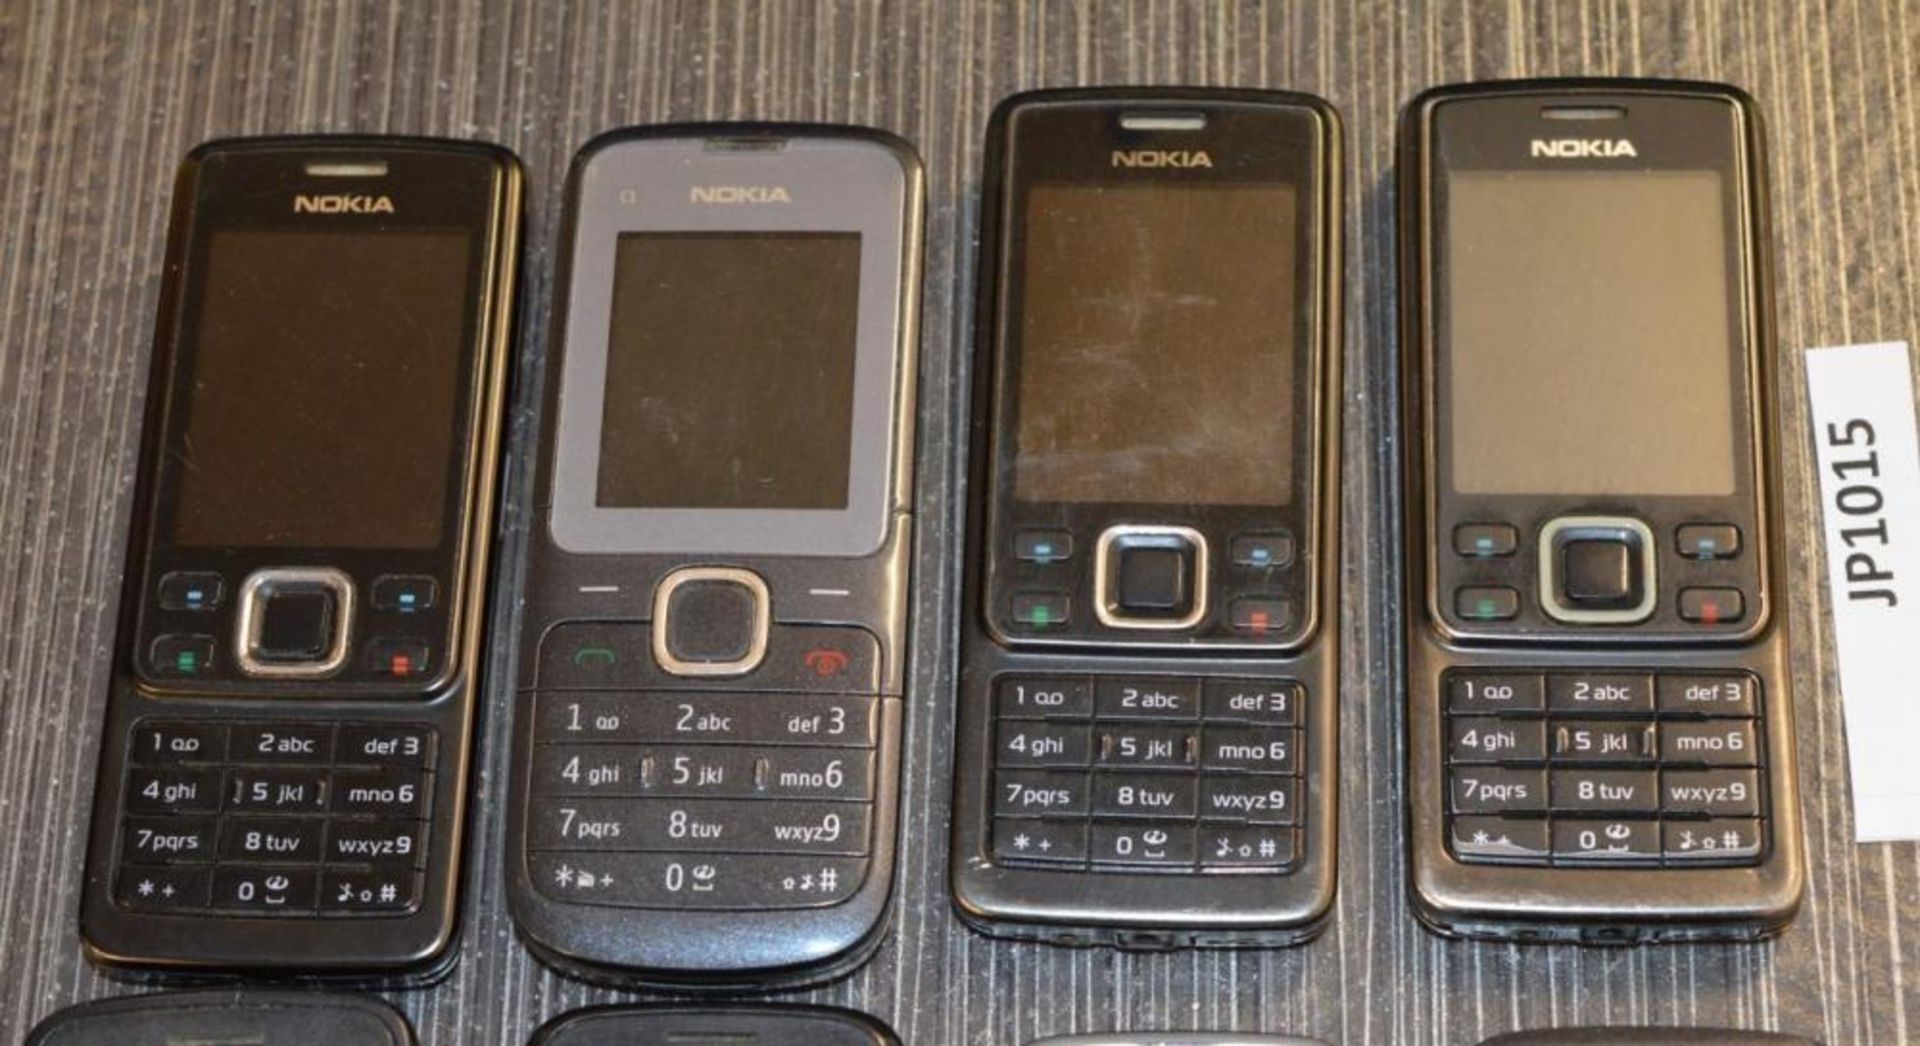 8 x Various NOKIA Mobile Phones - Removed From Company Closure - CL400 - Ref JP1015 - Location: Altr - Image 2 of 4